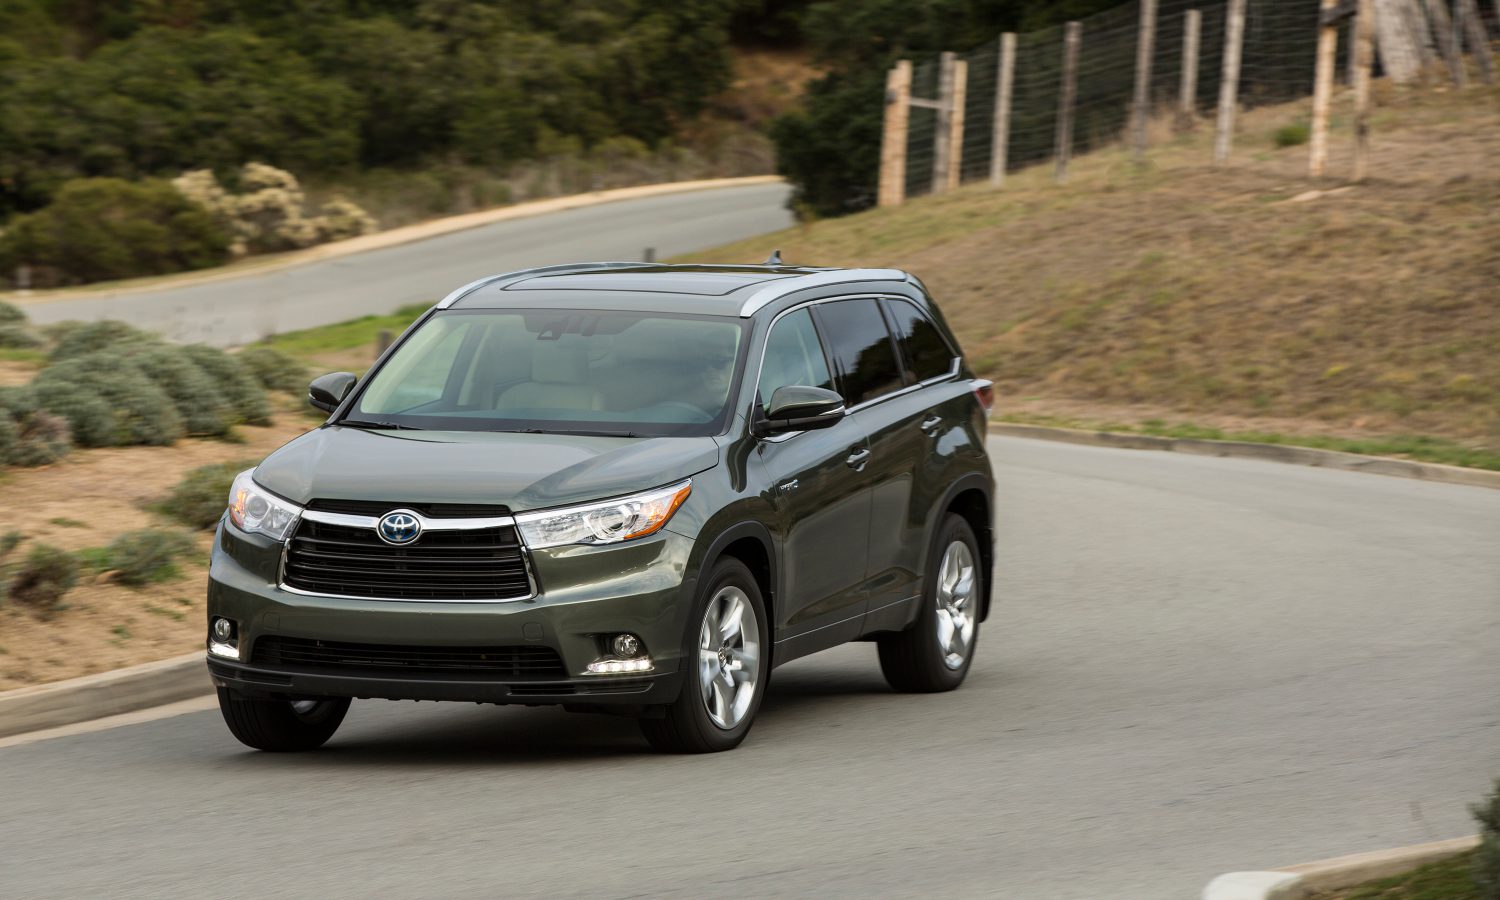 All-New 2014 Toyota Highlander Rings in the New Year with All the Bells and  Whistles - Toyota USA Newsroom